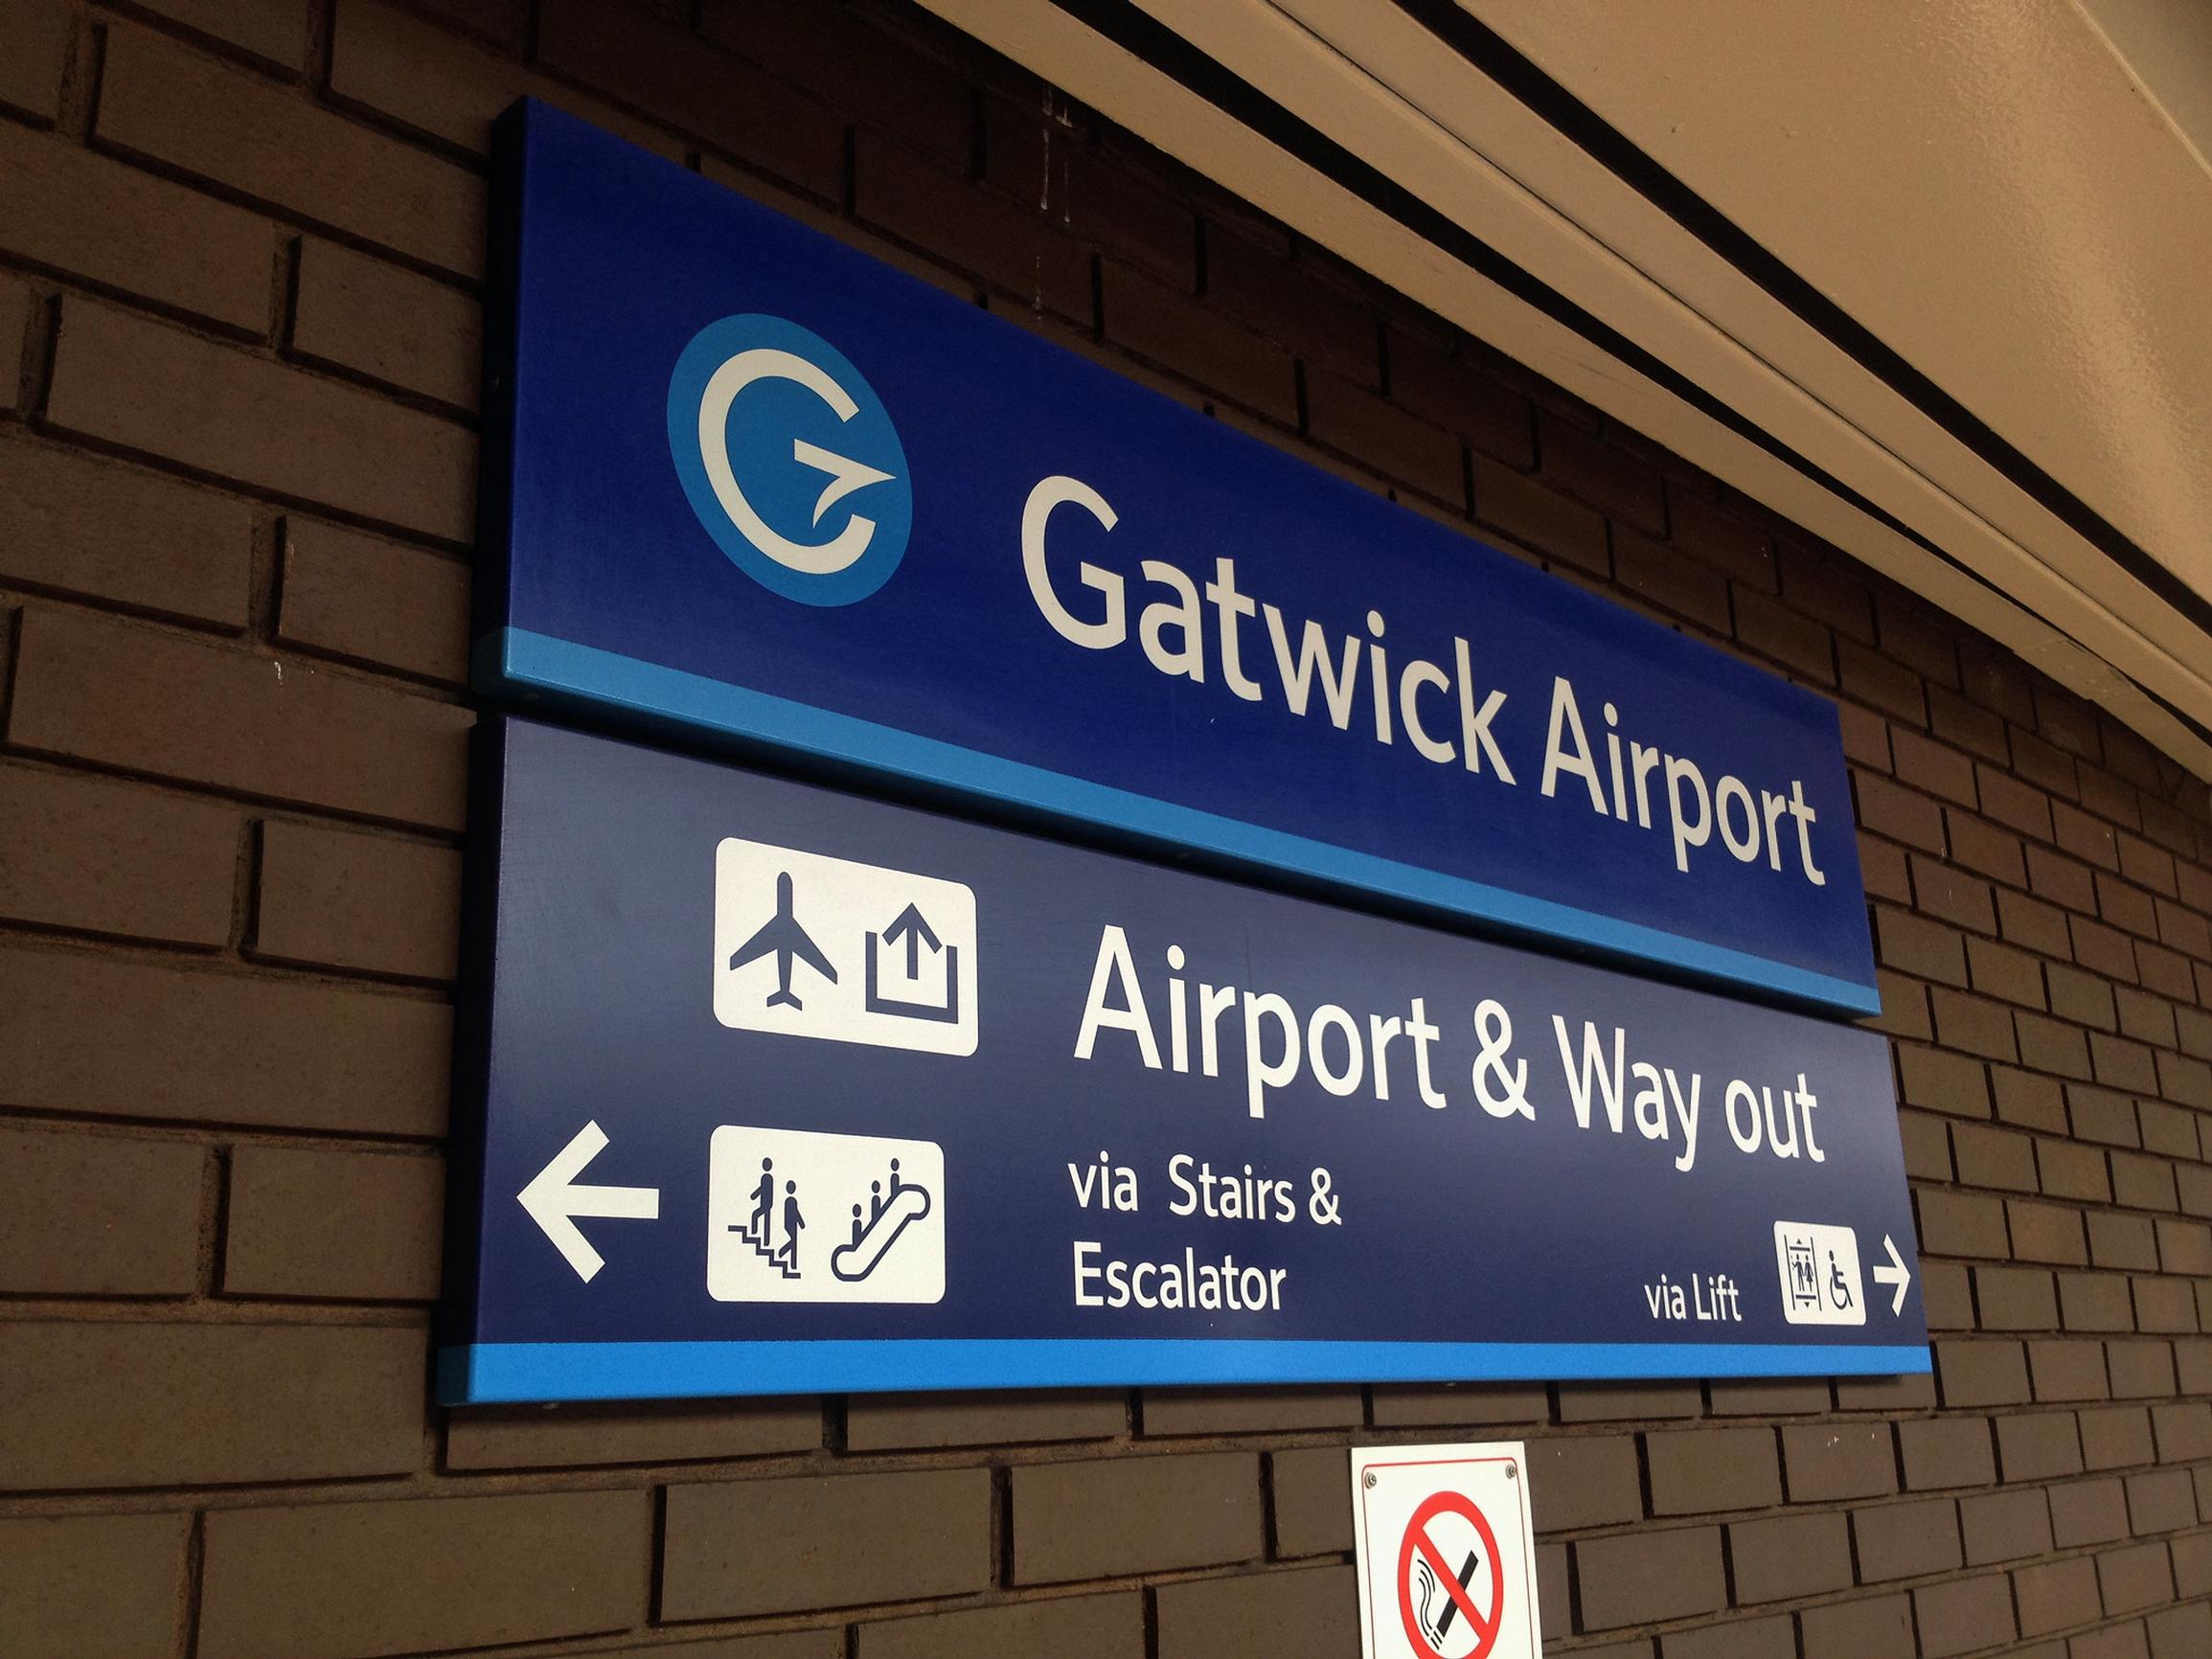 Gatwick: £5 charge for ten minute stay